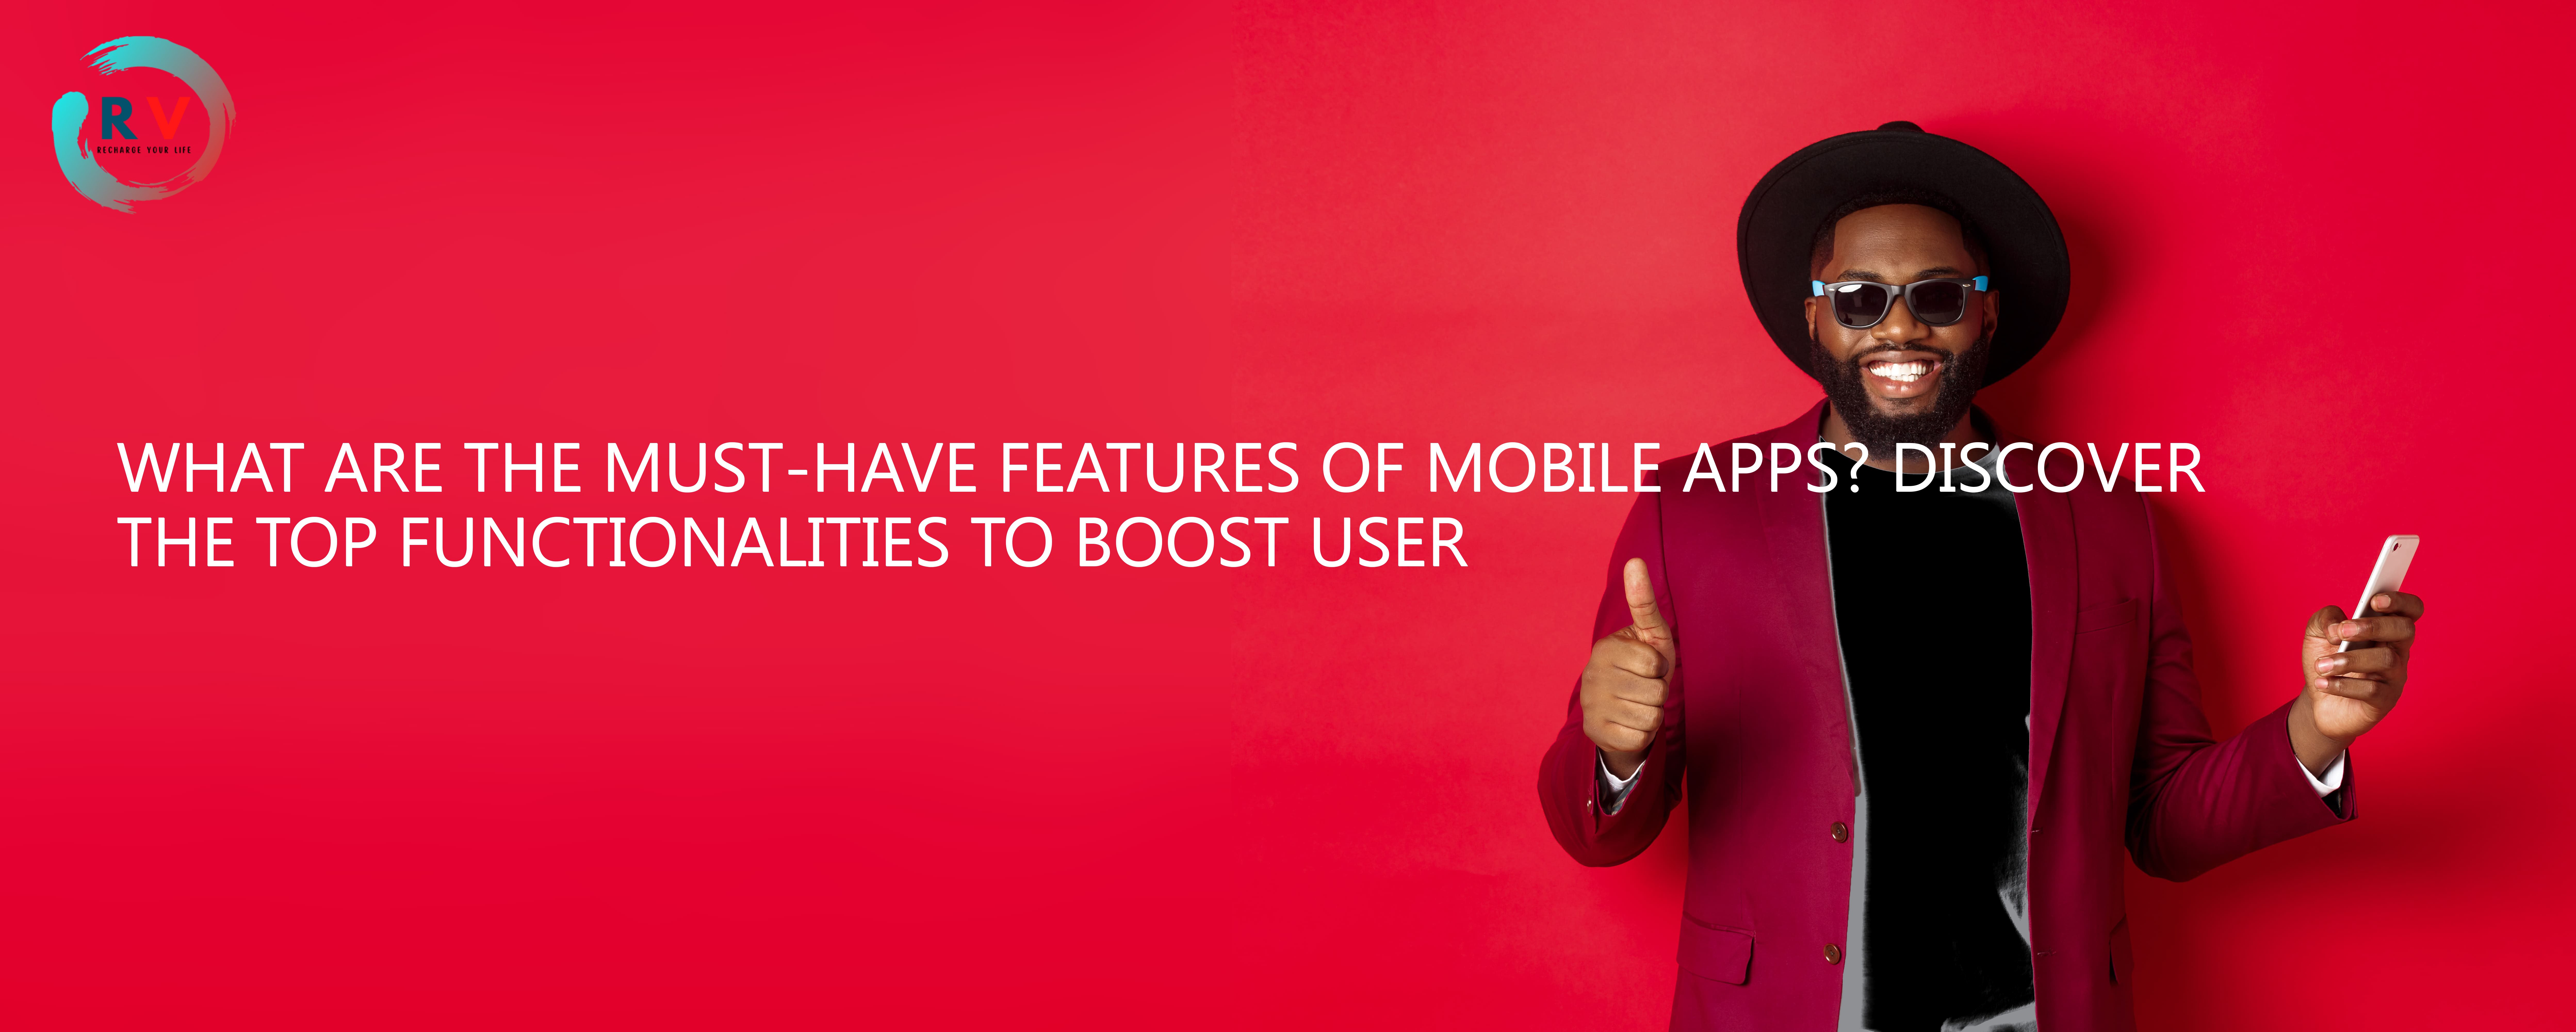 What are the must-have features of mobile apps? Discover the top functionalities to boost user engagement!